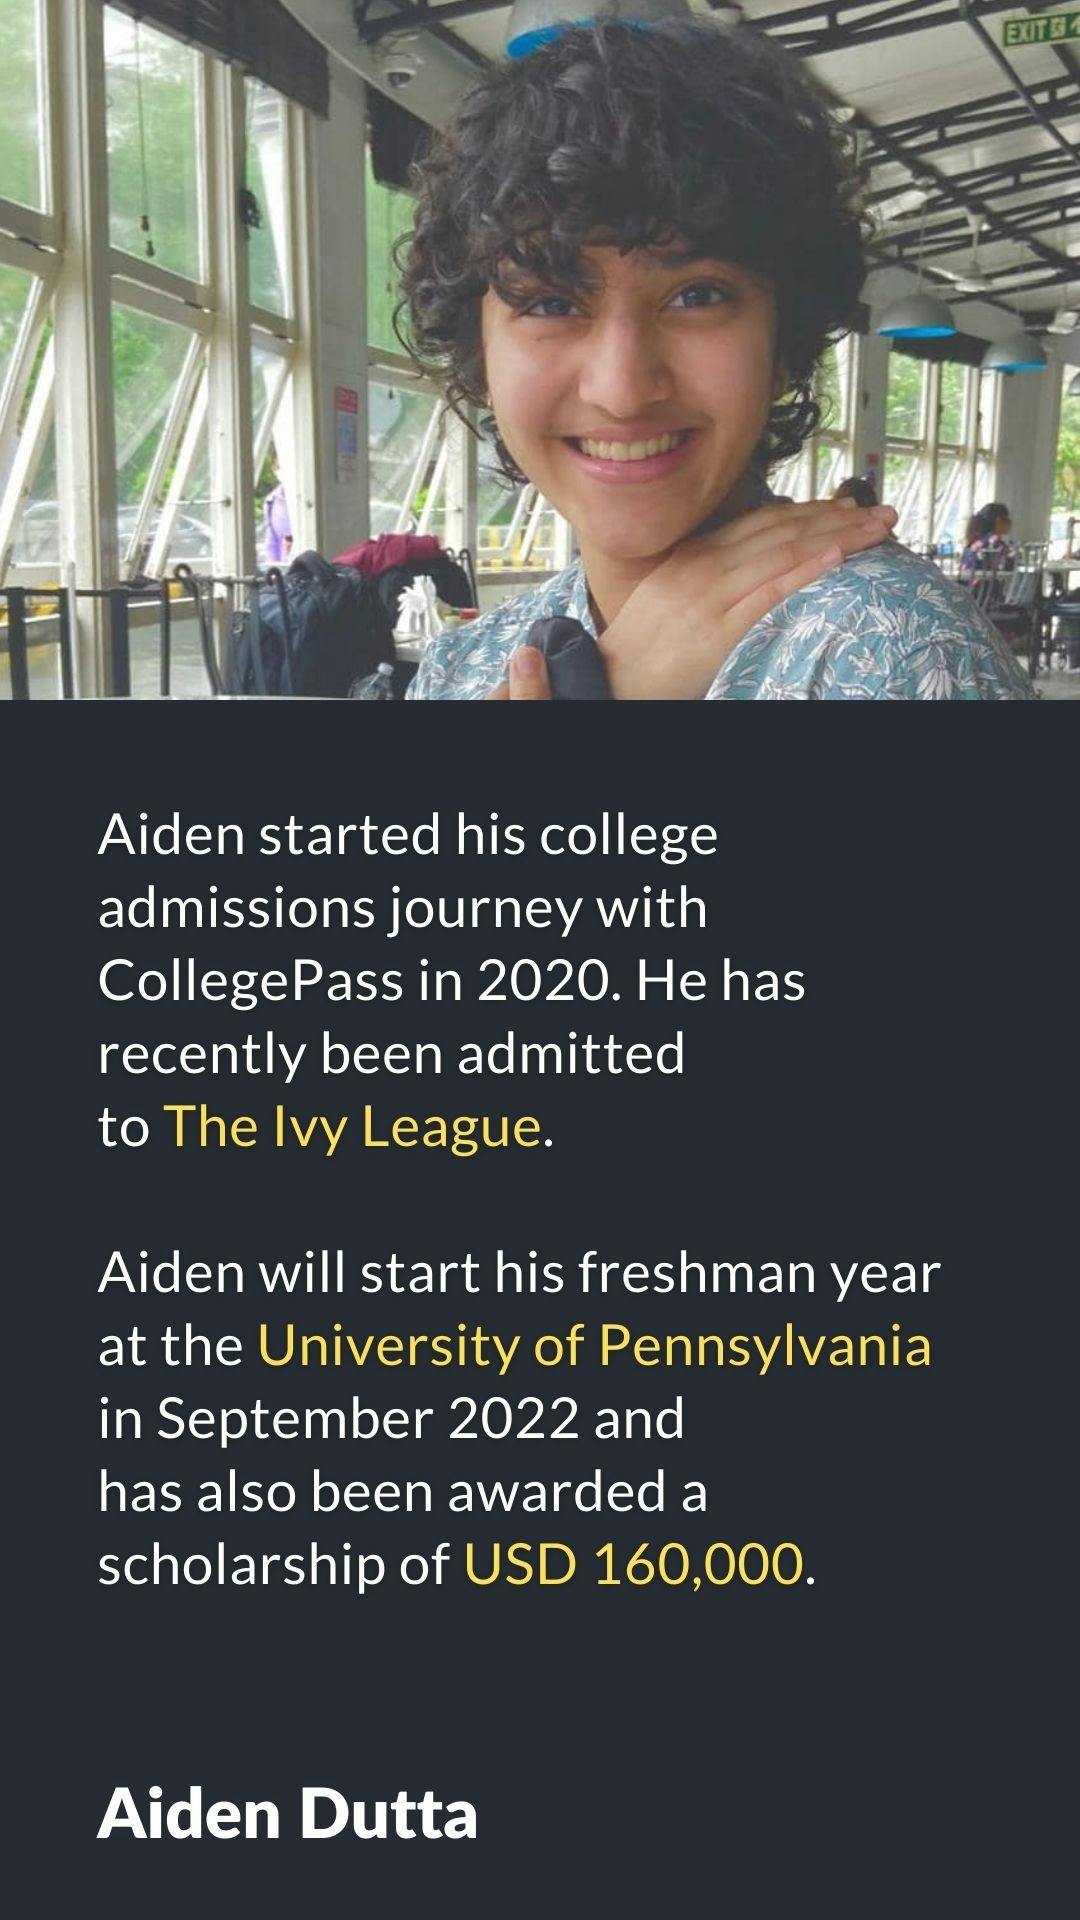 Aiden got admitted to his dream college, 'The University of Pennsylvania.'